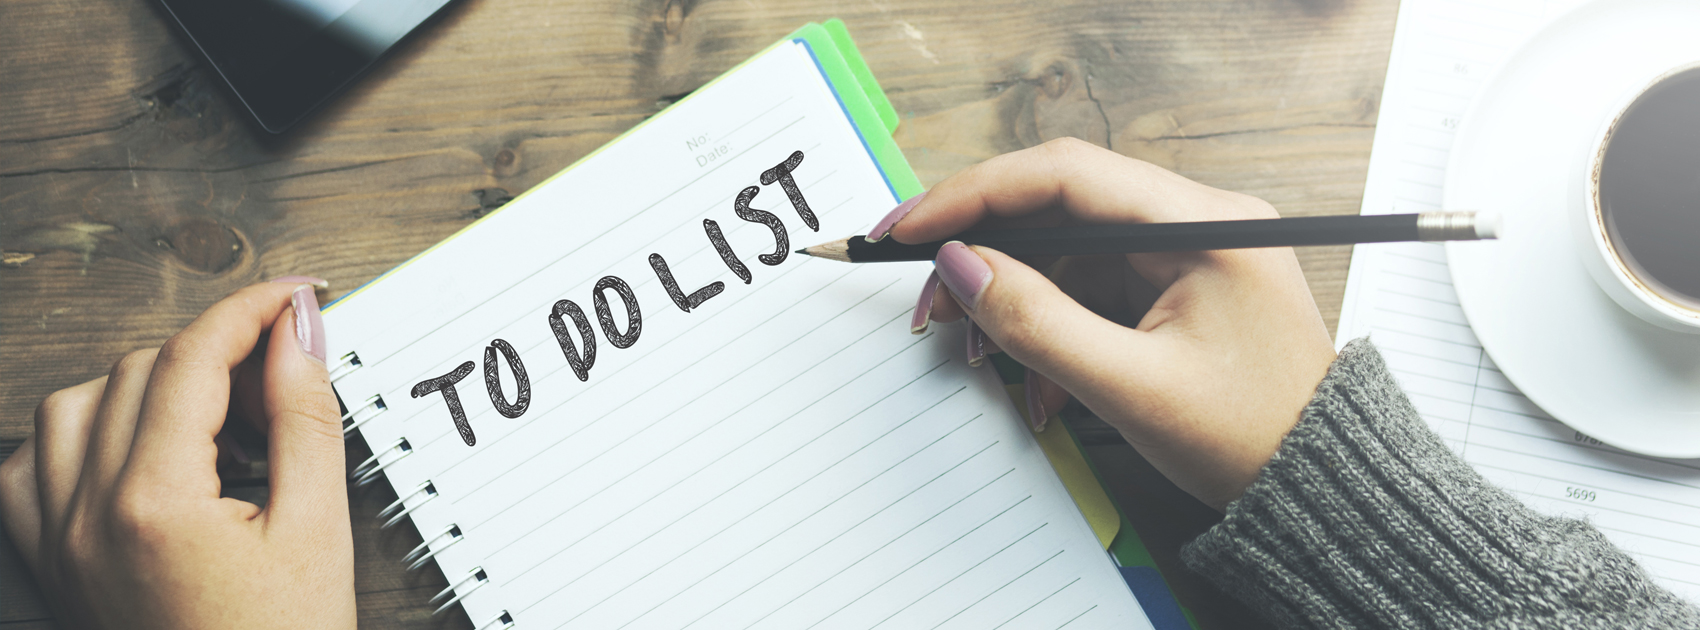 Why It Is Important To Have A To Do List,Startup Stories,Most Important To Do List,To Do List,Benefits of To Do List,Advantages of To Do List,Business News,To Do List Importance,Best To Do List,To Do List Techniques